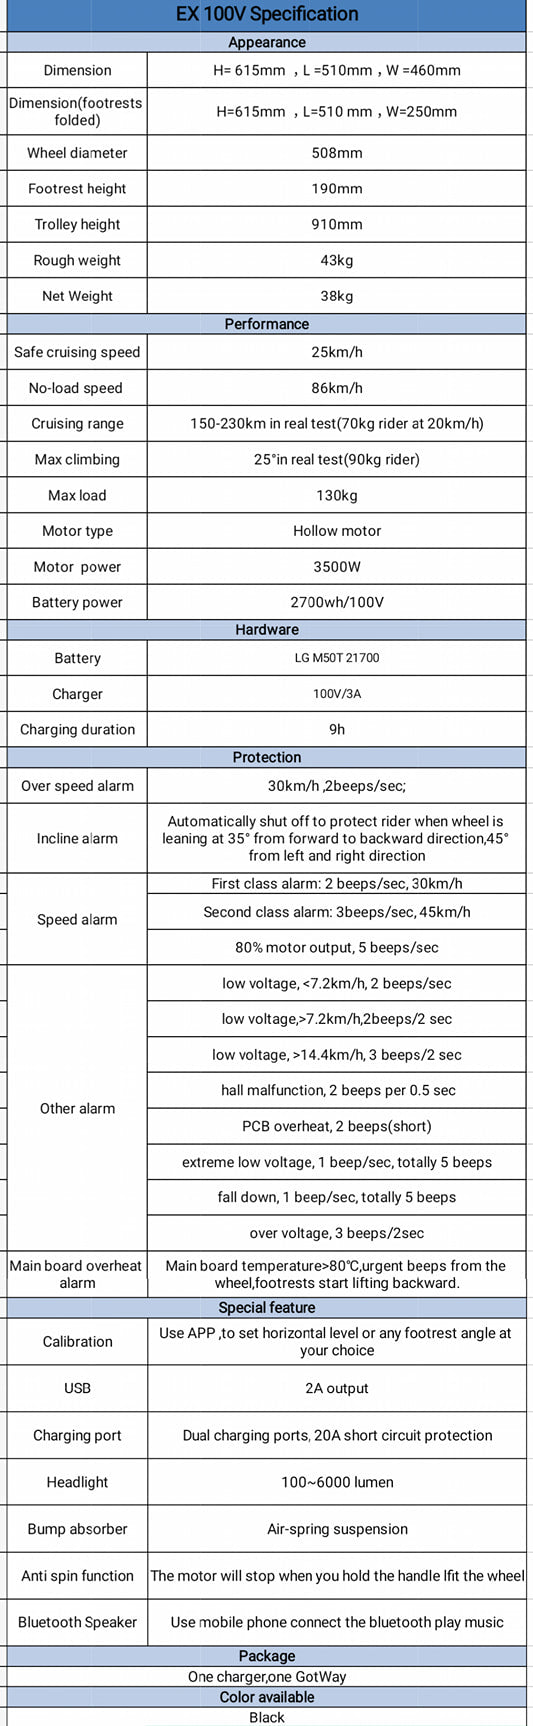 EX specifications